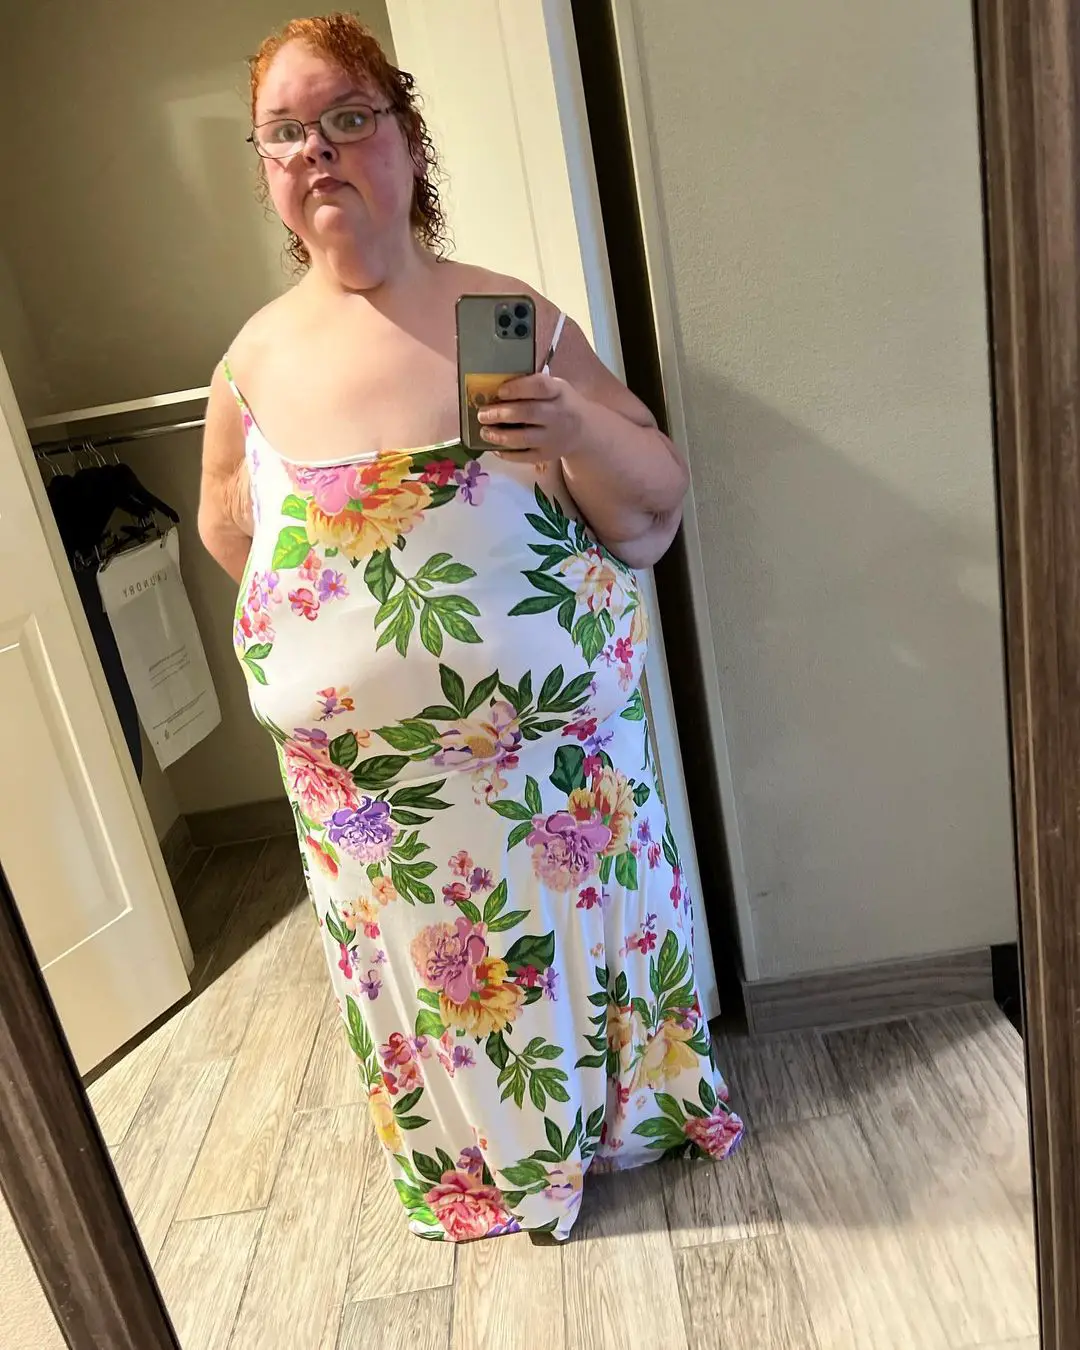 Tammy Slaton Of '1000-lb Sisters' Is Unrecognizable In Gorgeous Swimsuit Snap